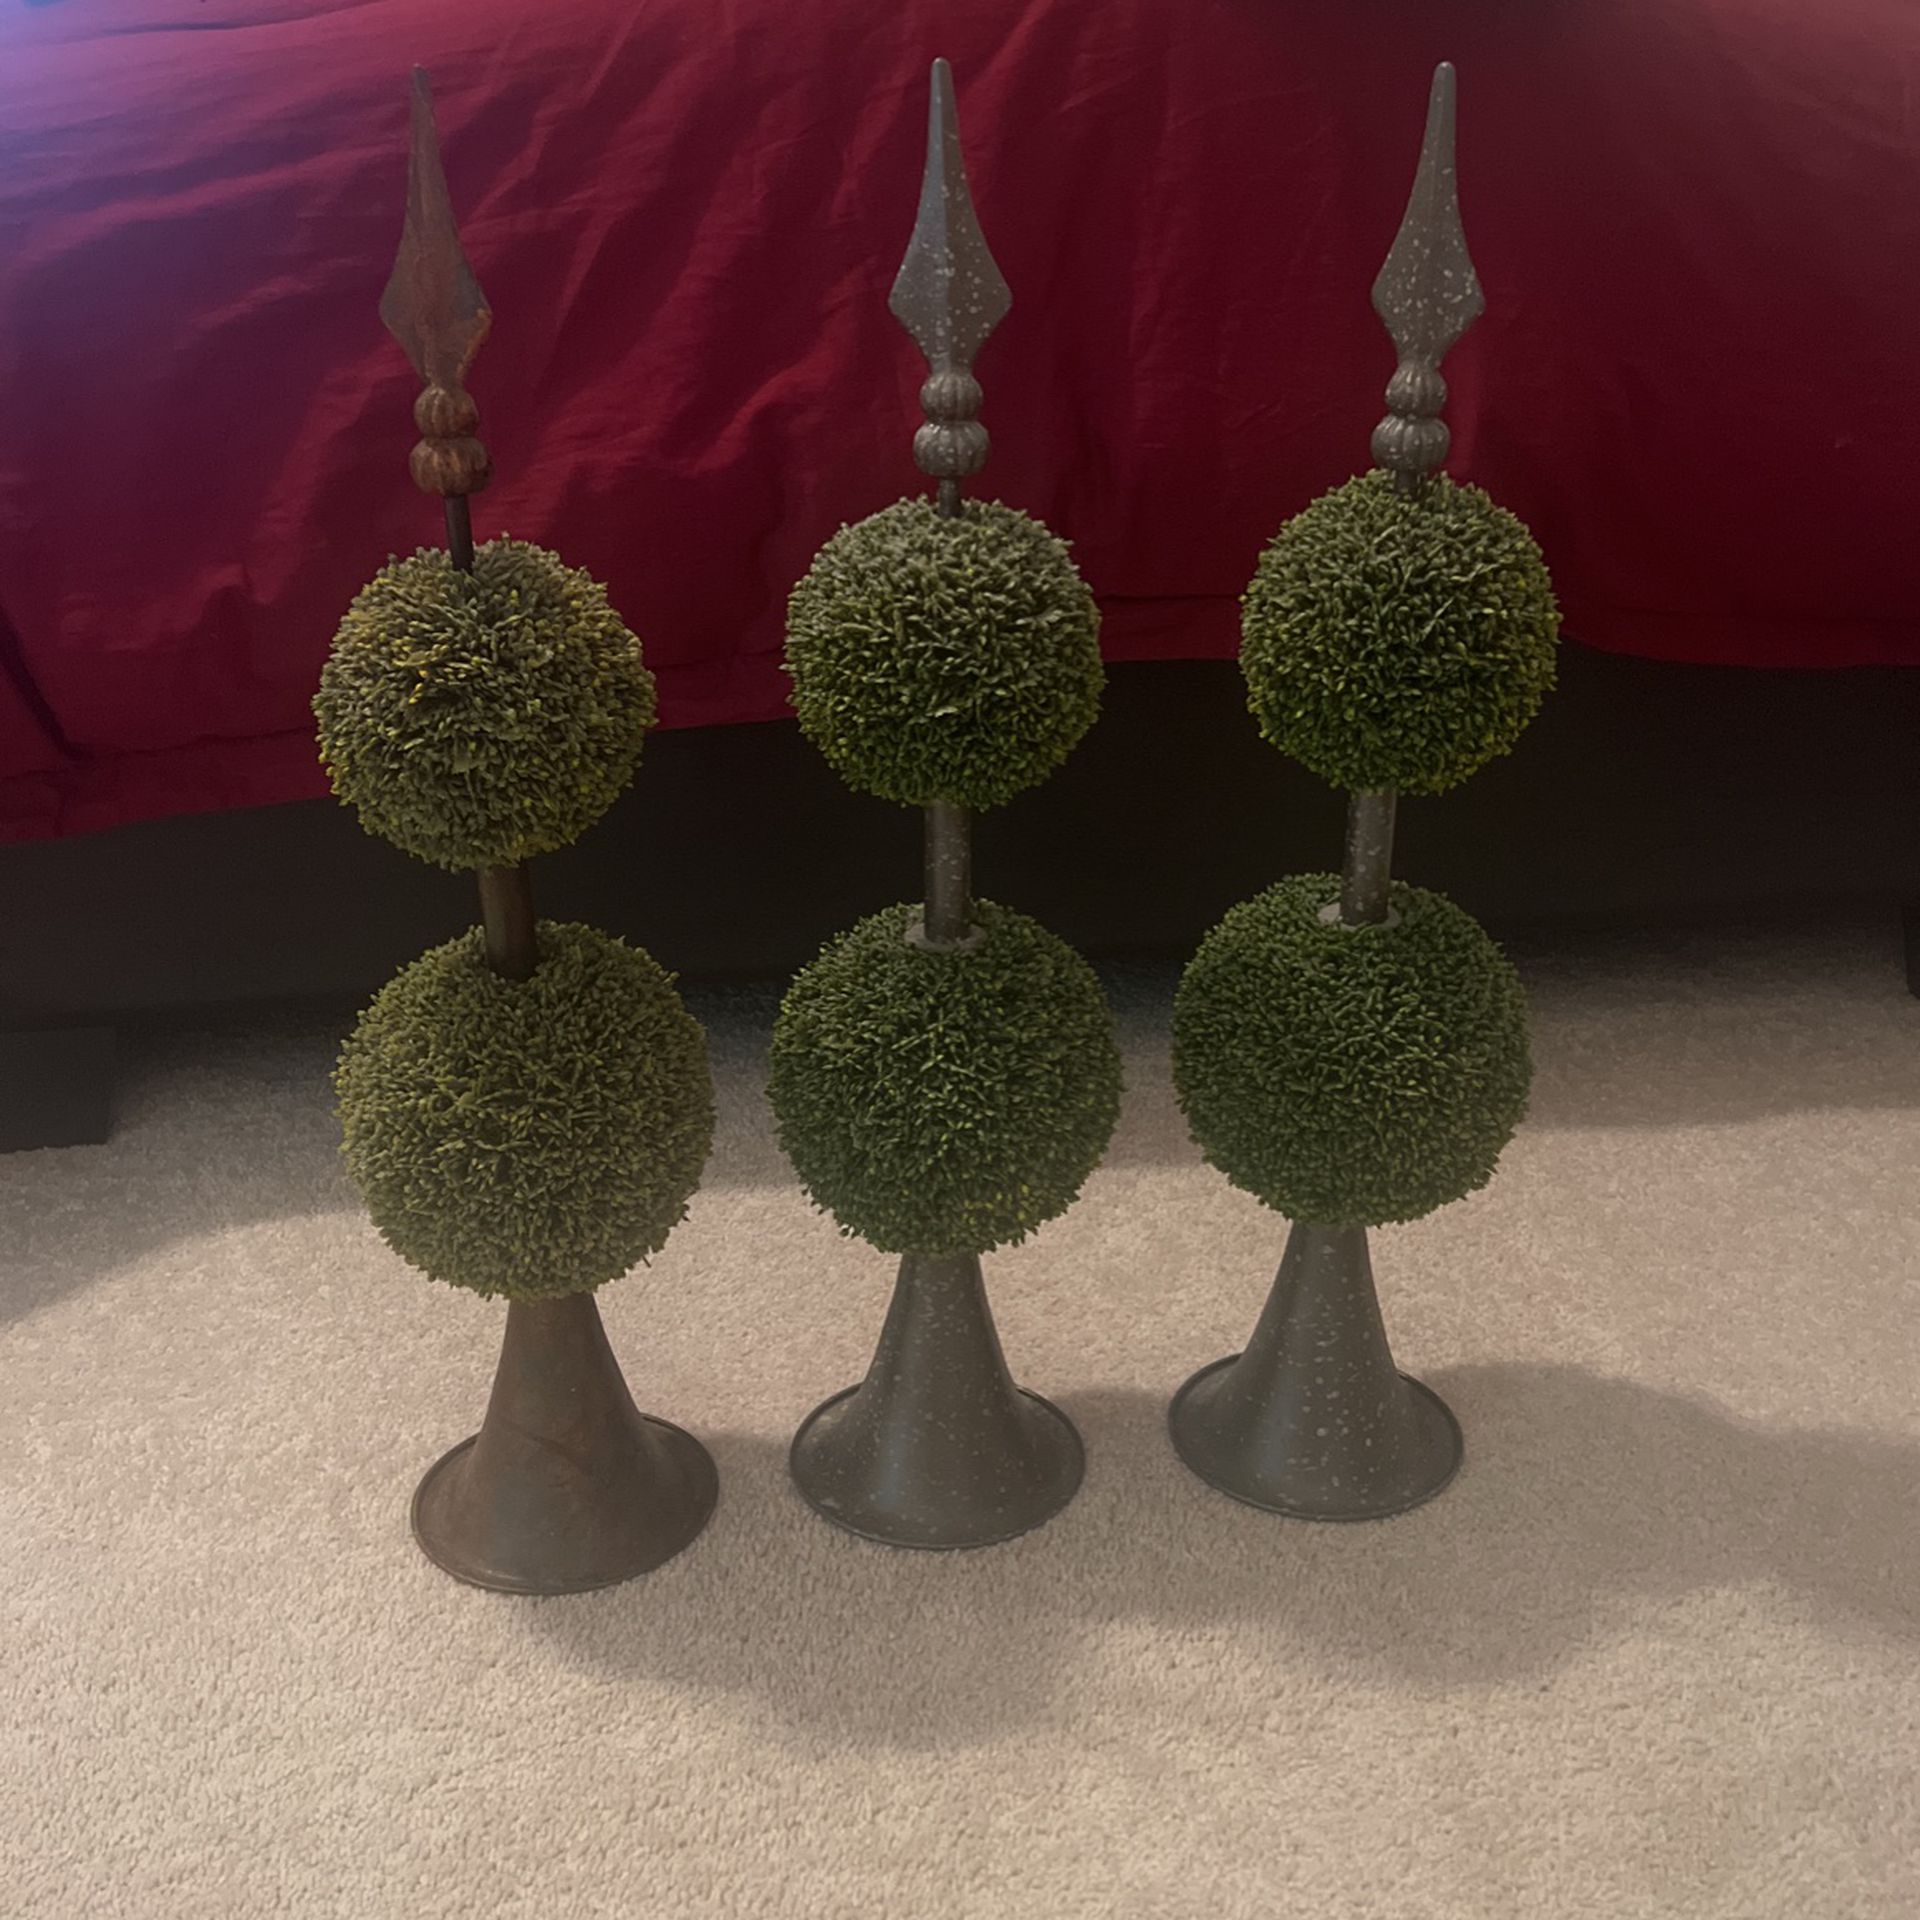 Artificial Boxwood Topiary Plants - 2 Ball-Shape Faux Topiaries  Home Decor